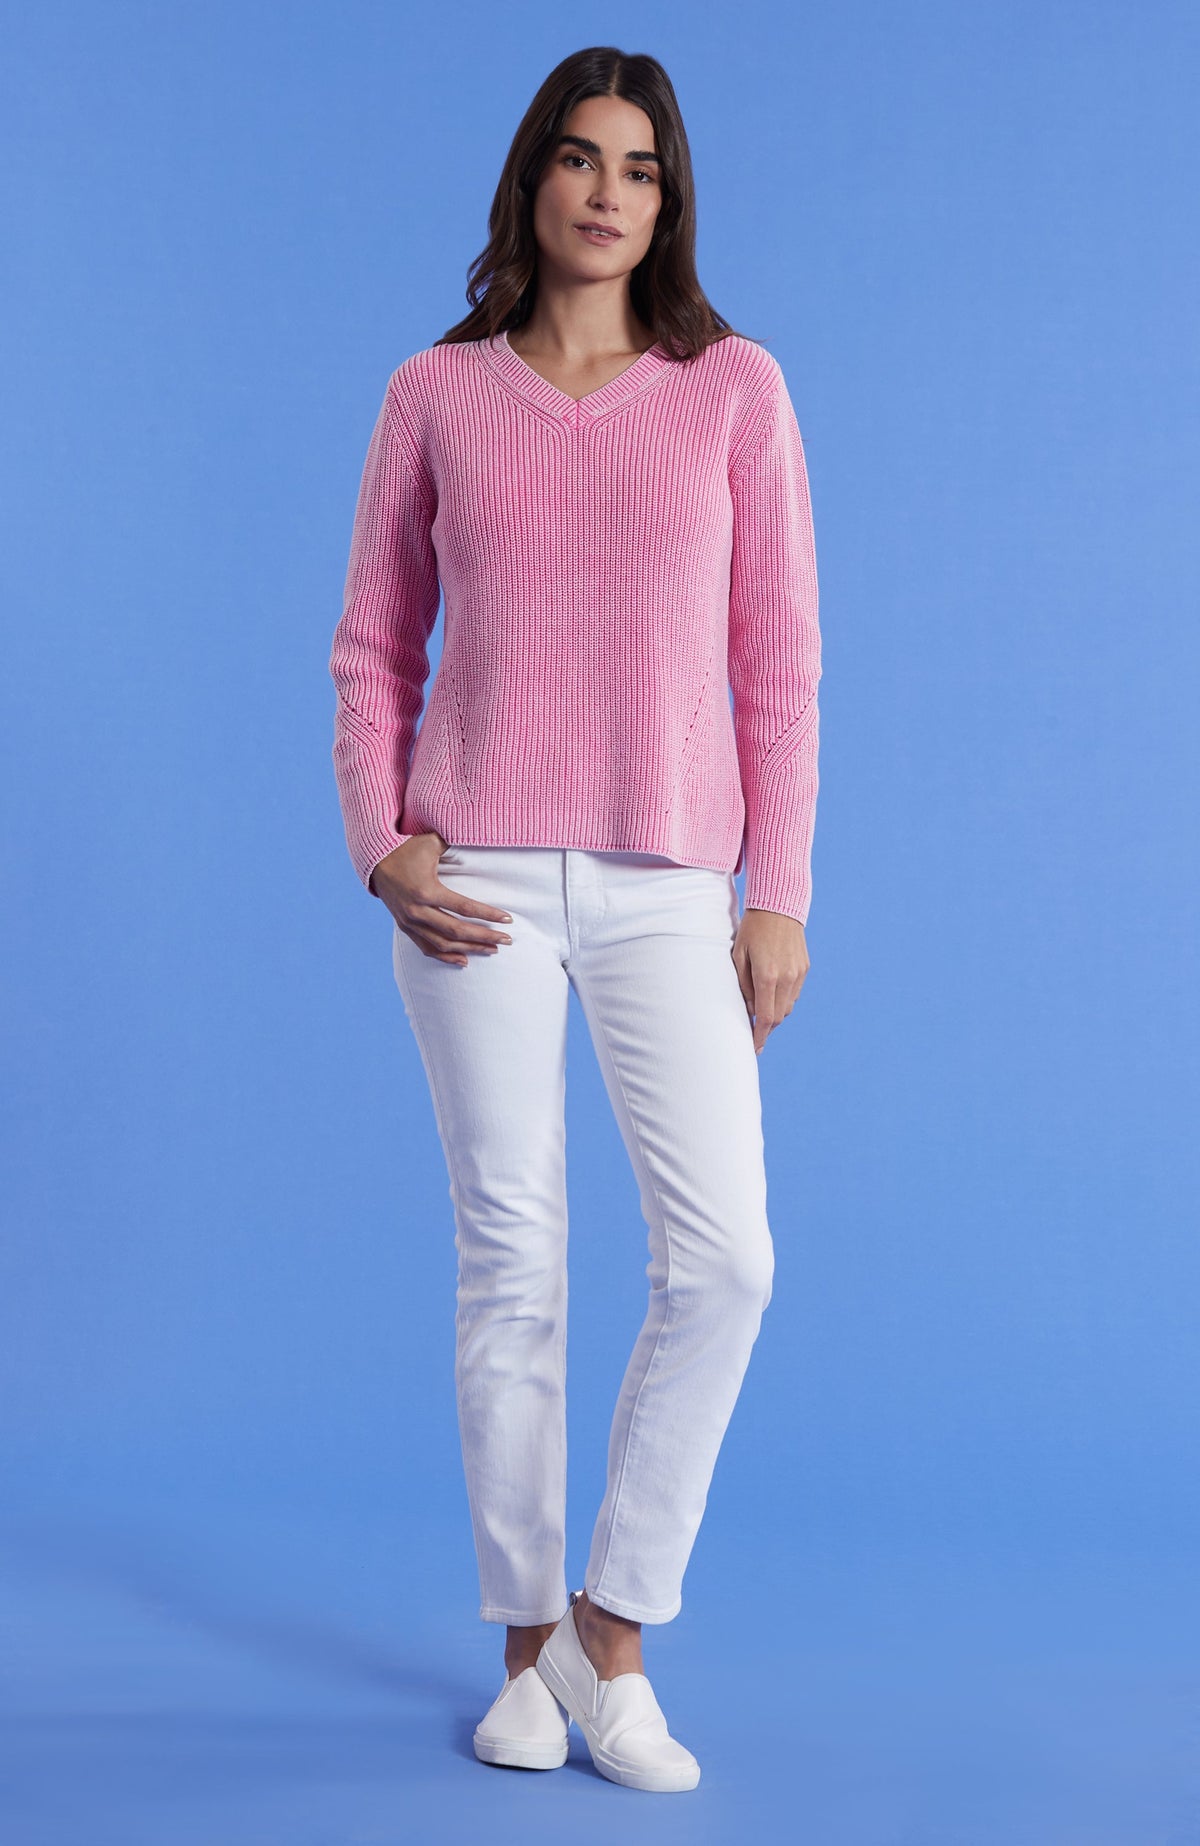 Mineral Wash Shaker Sweater